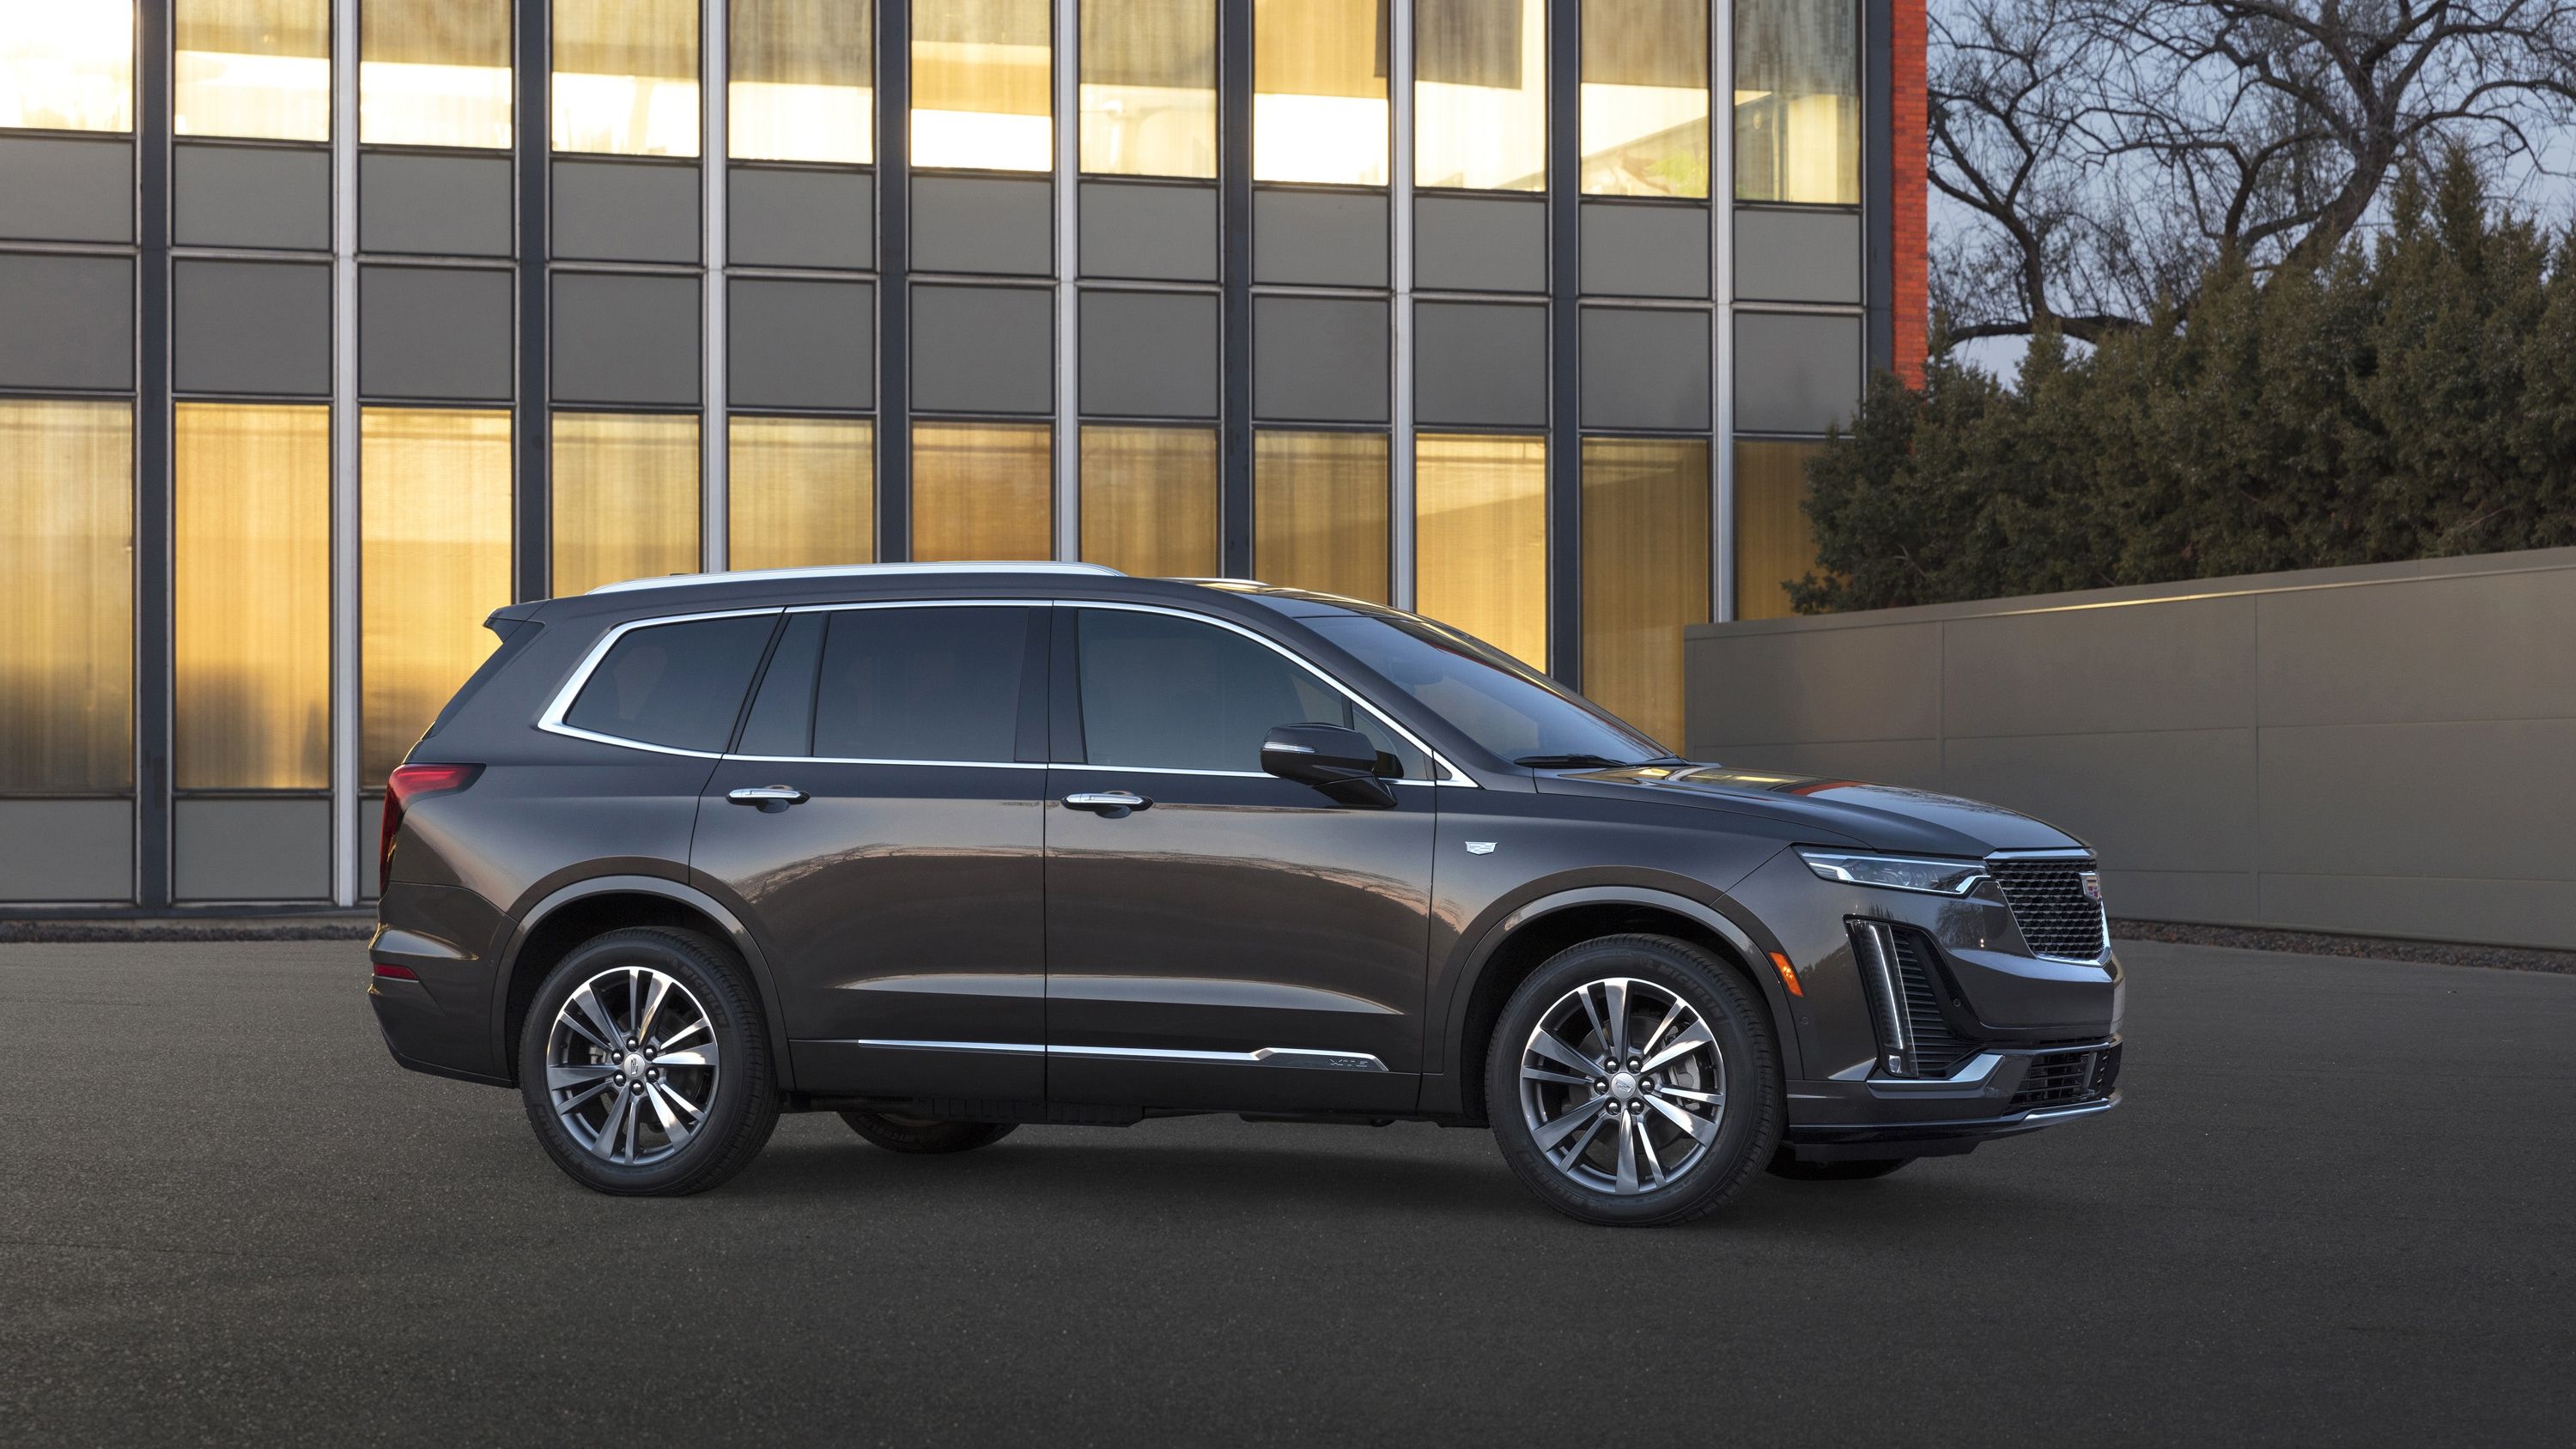 2019 The 2020 Cadillac XT6 Is What Caddy Needs, But Is It Too Late?